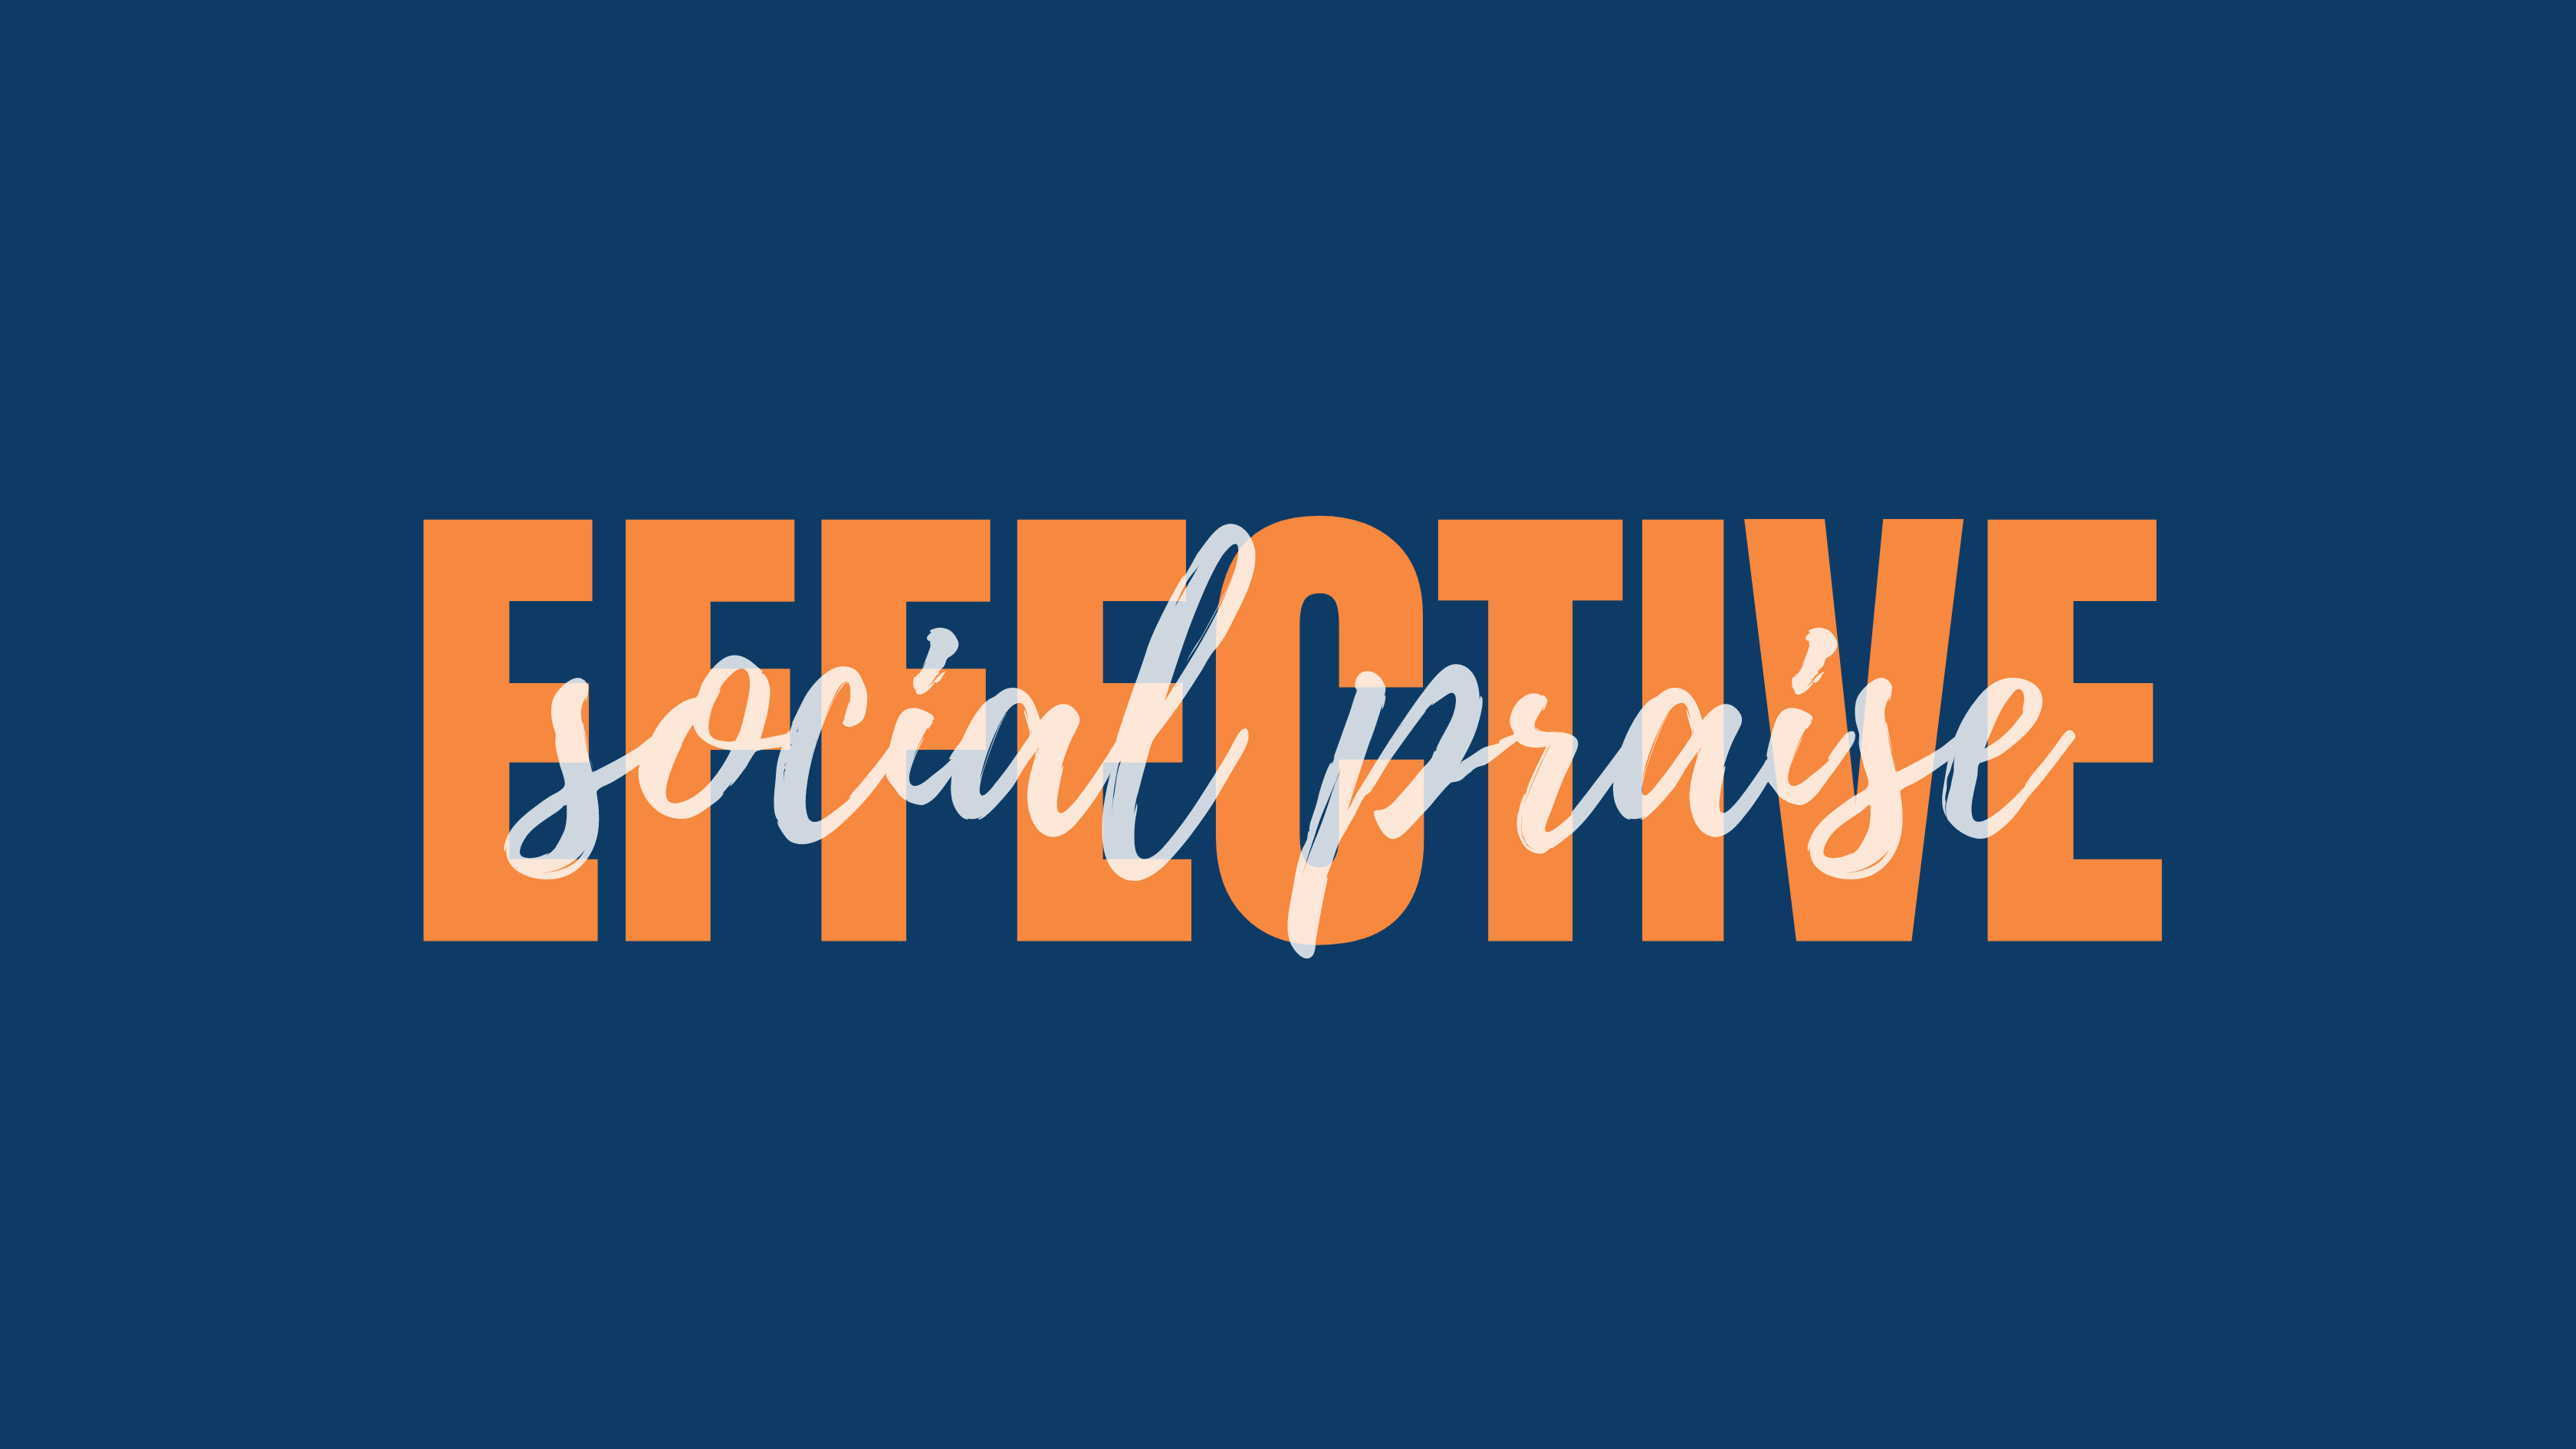 effective in capital orange with social praise in cursive on navy background